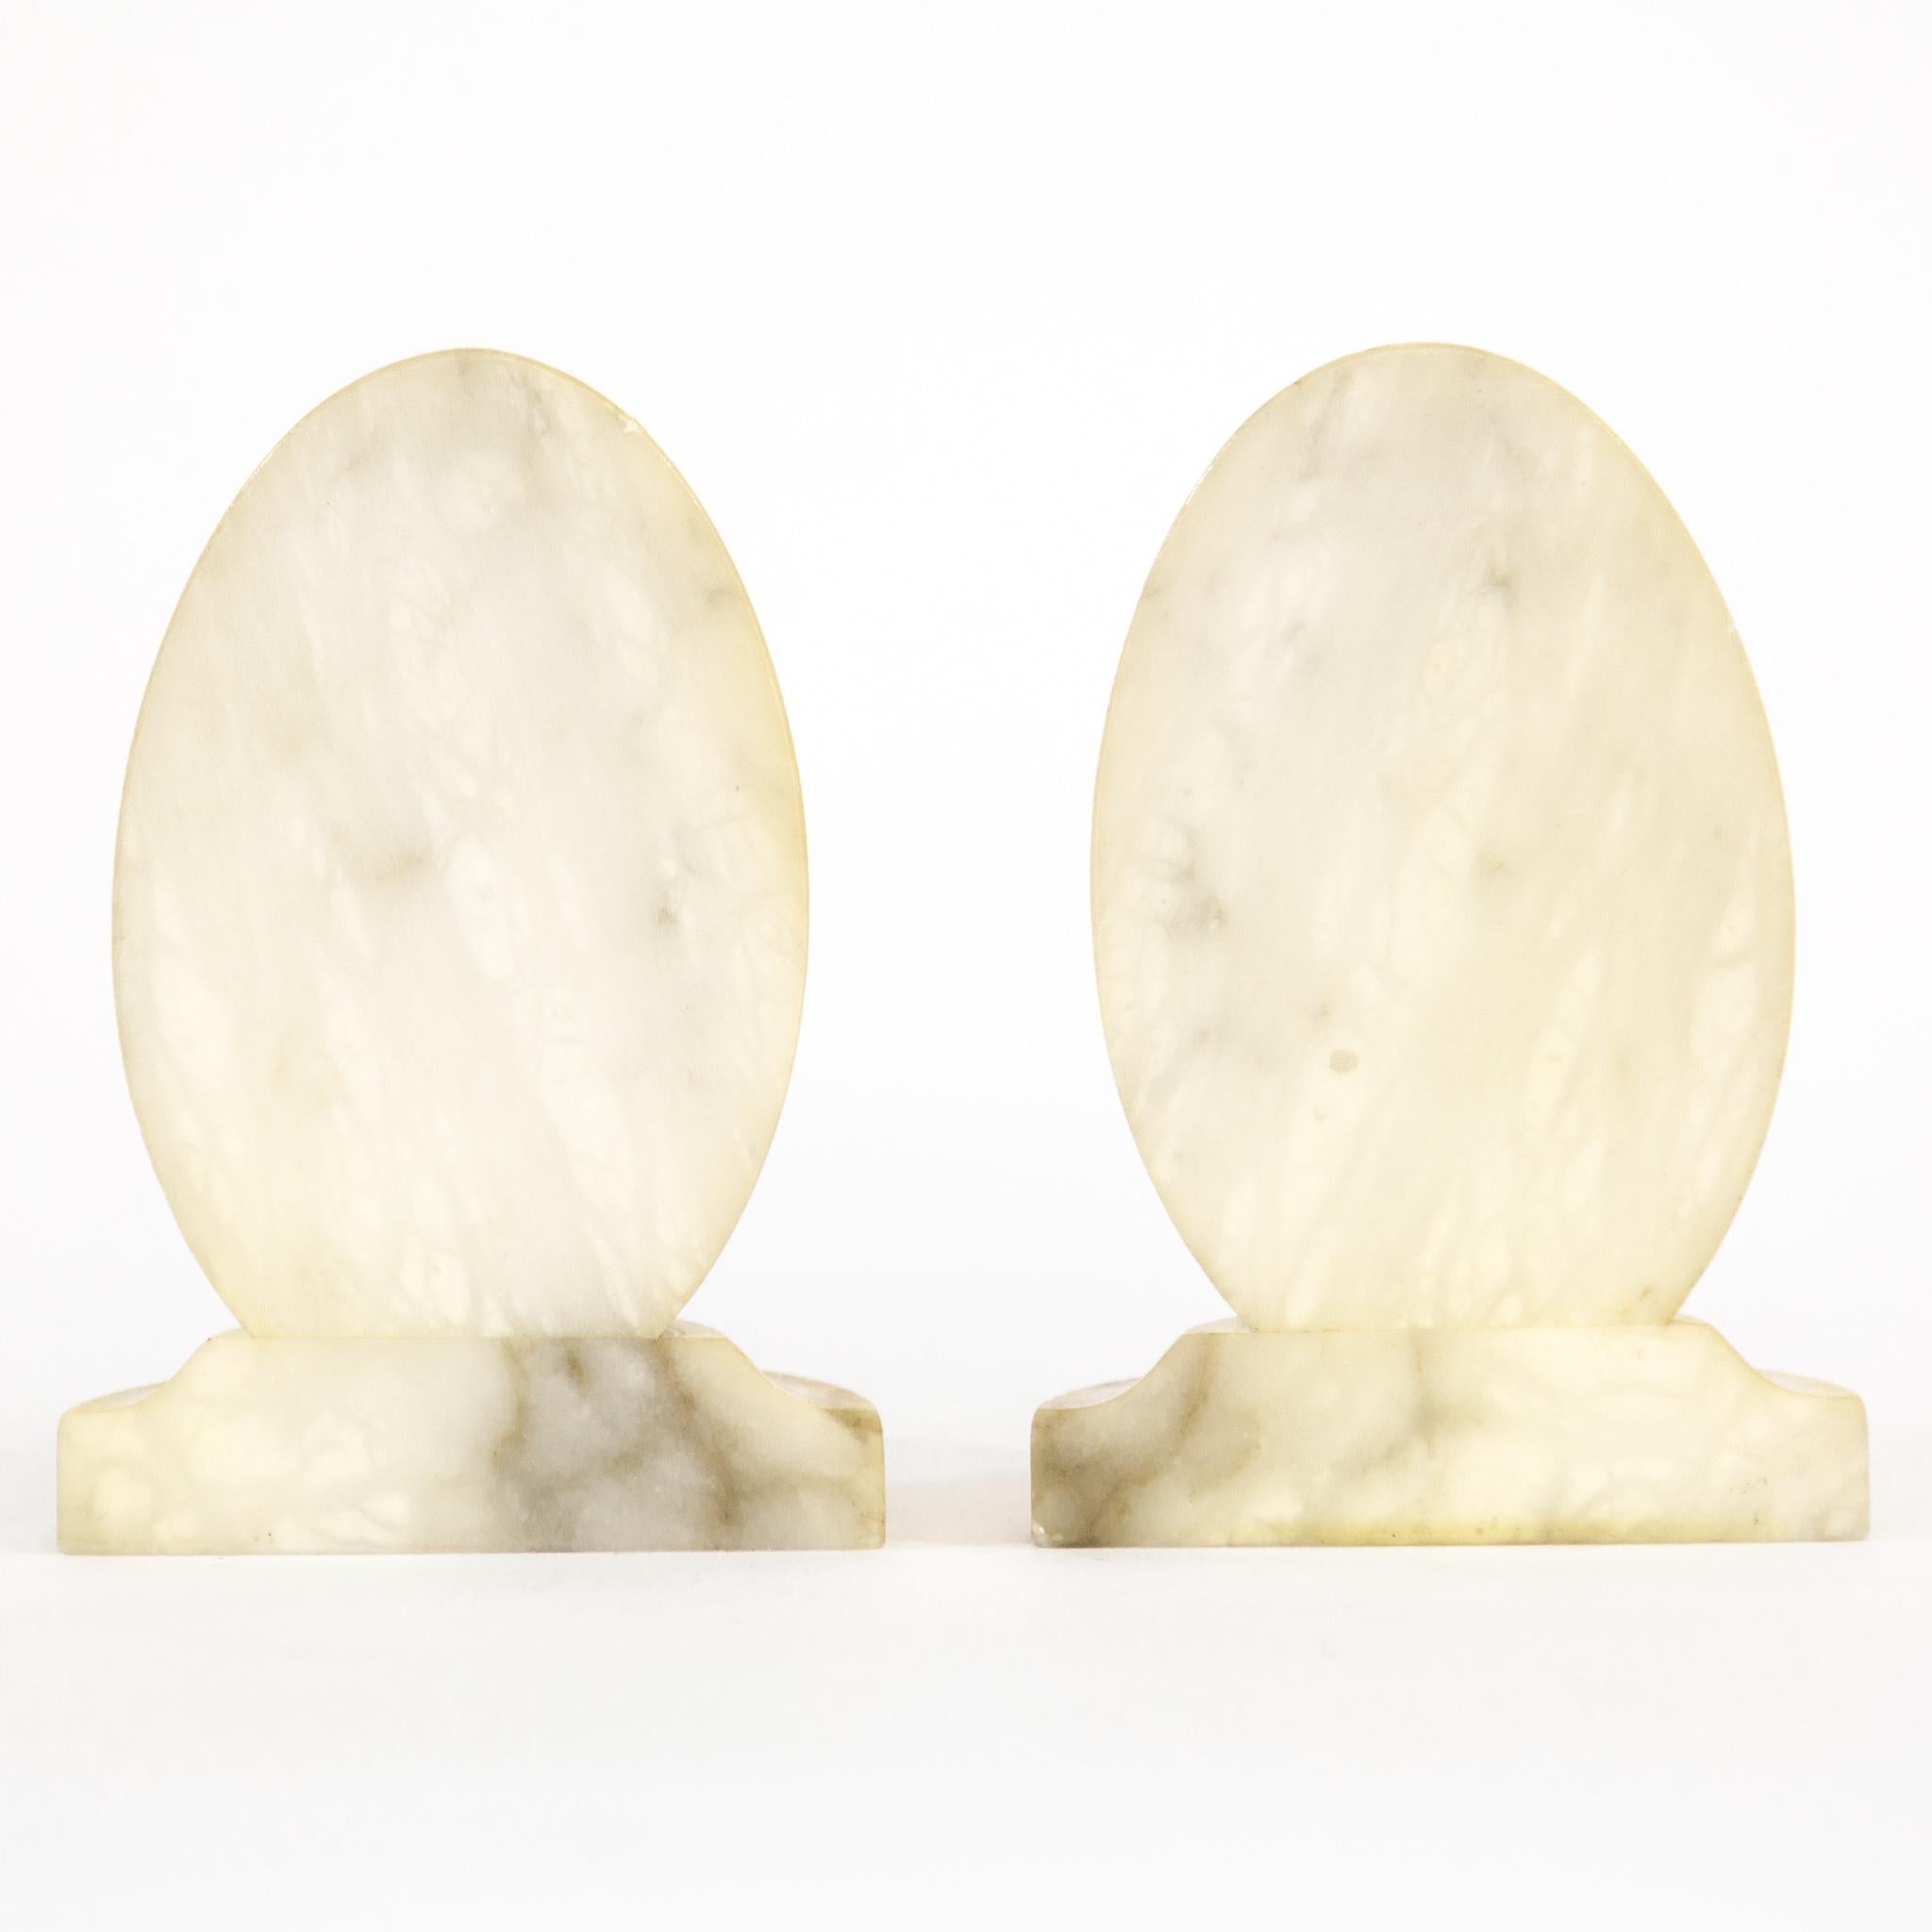 20th Century Pair of Mid-Century Italian Alabaster Off-White Egg-Shape Bookends